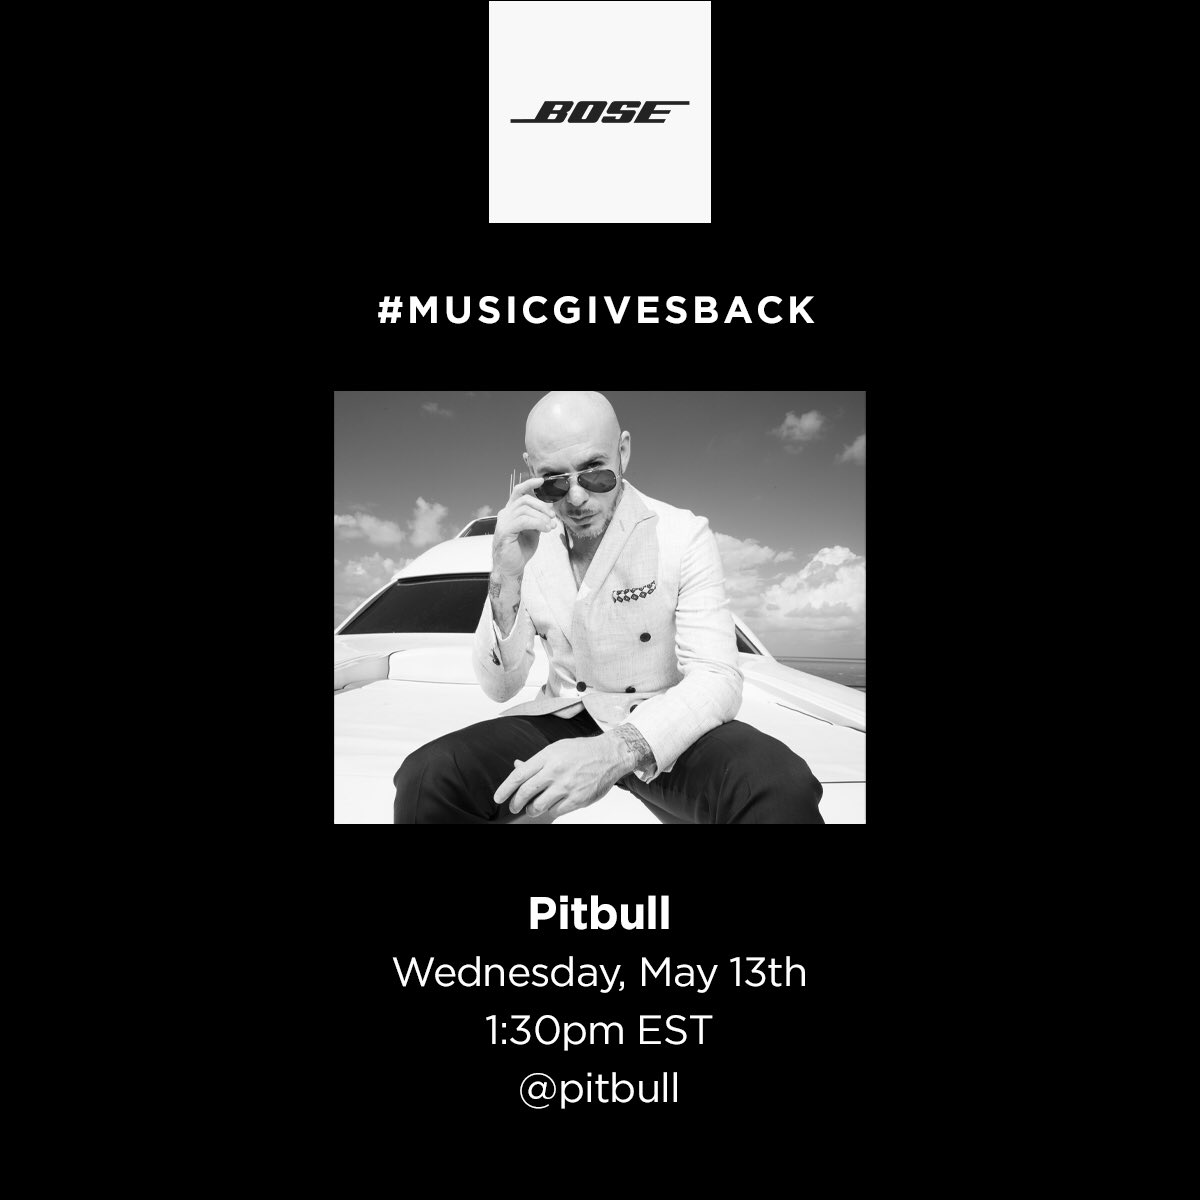 Catch yours truly on IG Live tomorrow at 1:30pm EST for @Bose #MusicGivesBack at @SLAMMiaOfficial Dale! 